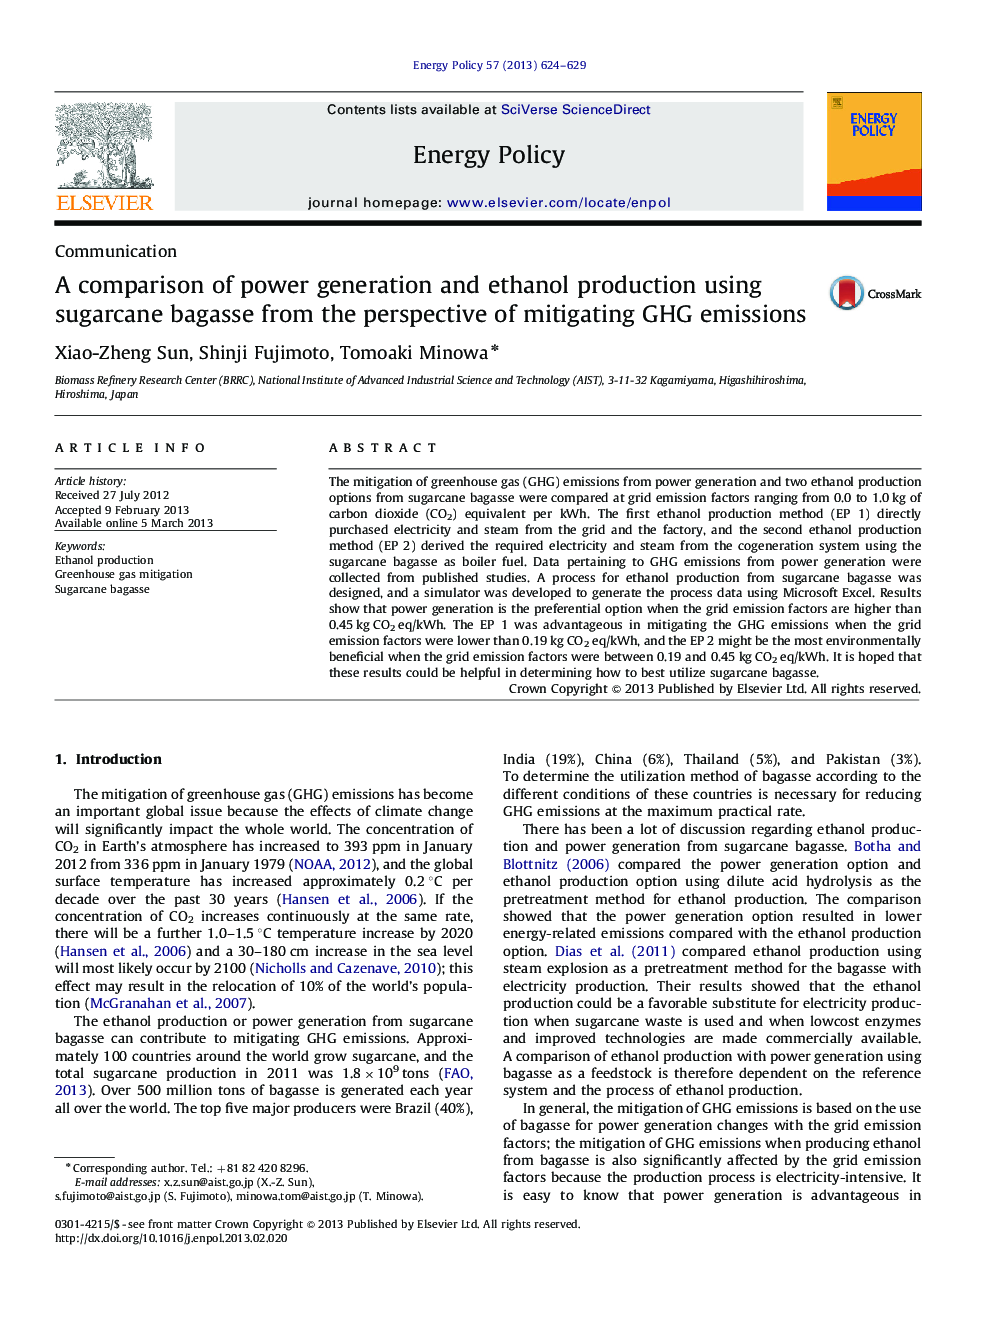 A comparison of power generation and ethanol production using sugarcane bagasse from the perspective of mitigating GHG emissions